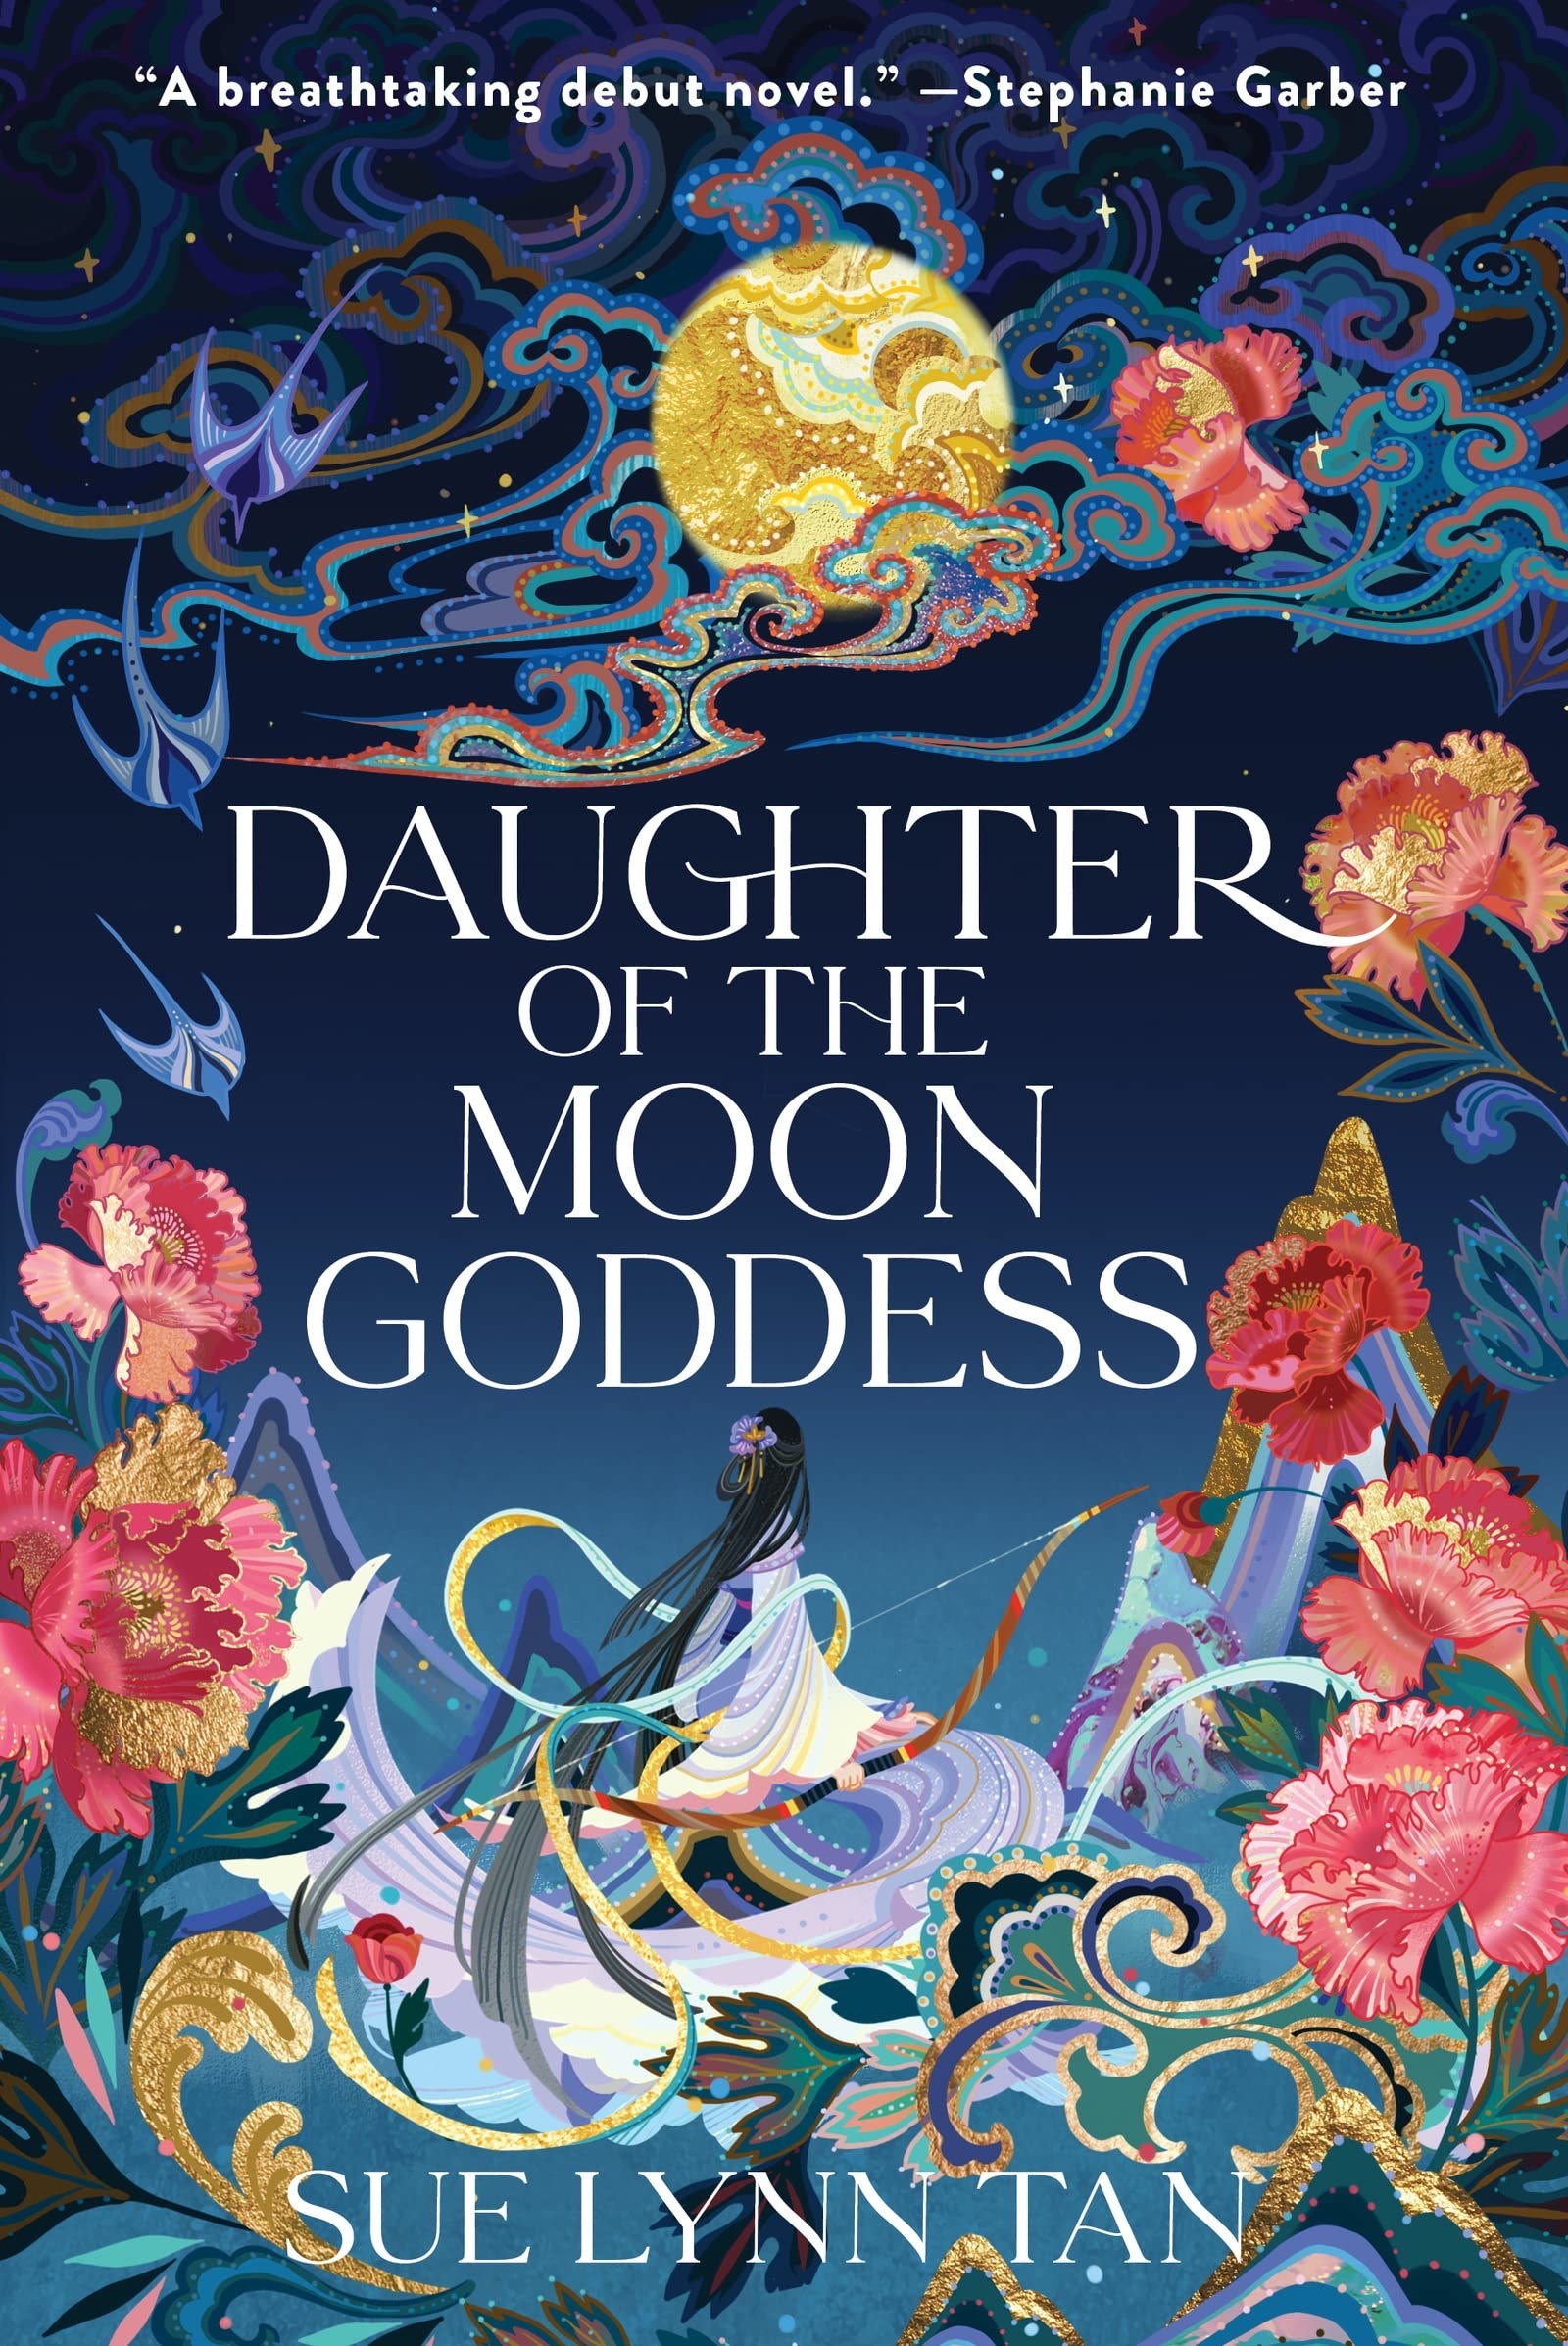 Daughter of the Moon Goddess cover. Book by Sue Lynn Tan.